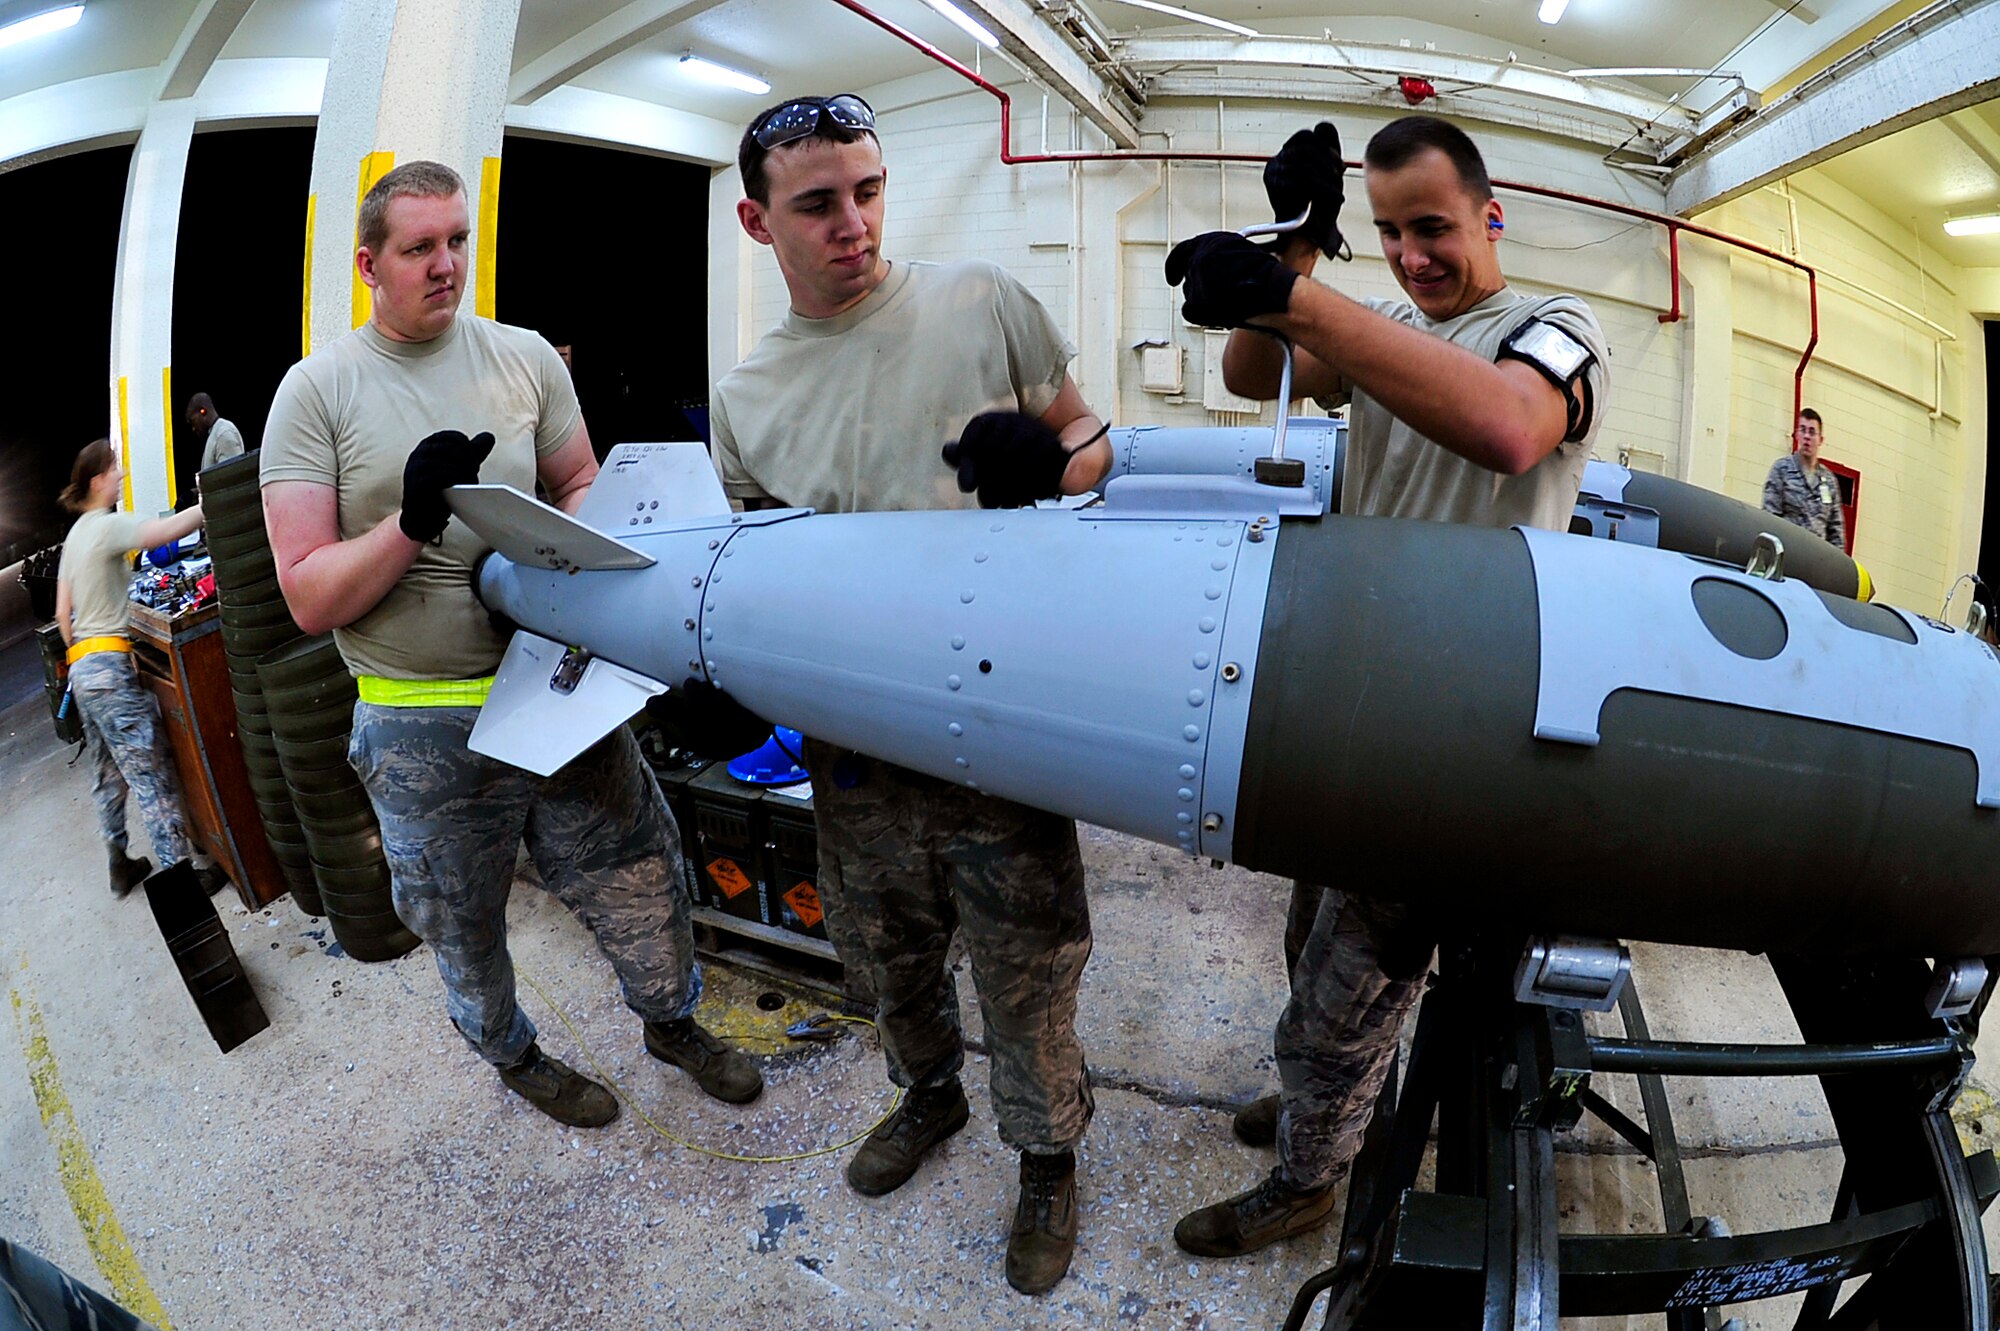 Airmen from the 18th Munitions Squadron attach the tail-ends of Mark 83 bomb bodies during Beverly High 10-02 at Kadena Air Base, Japan, March 24. The 18th Wing is participating in a Local Operational Readiness Exercise March 22-26 to test the readiness of Kadena Airmen.  (U.S. Air Force photo/Senior Airman Amanda Grabiec)        